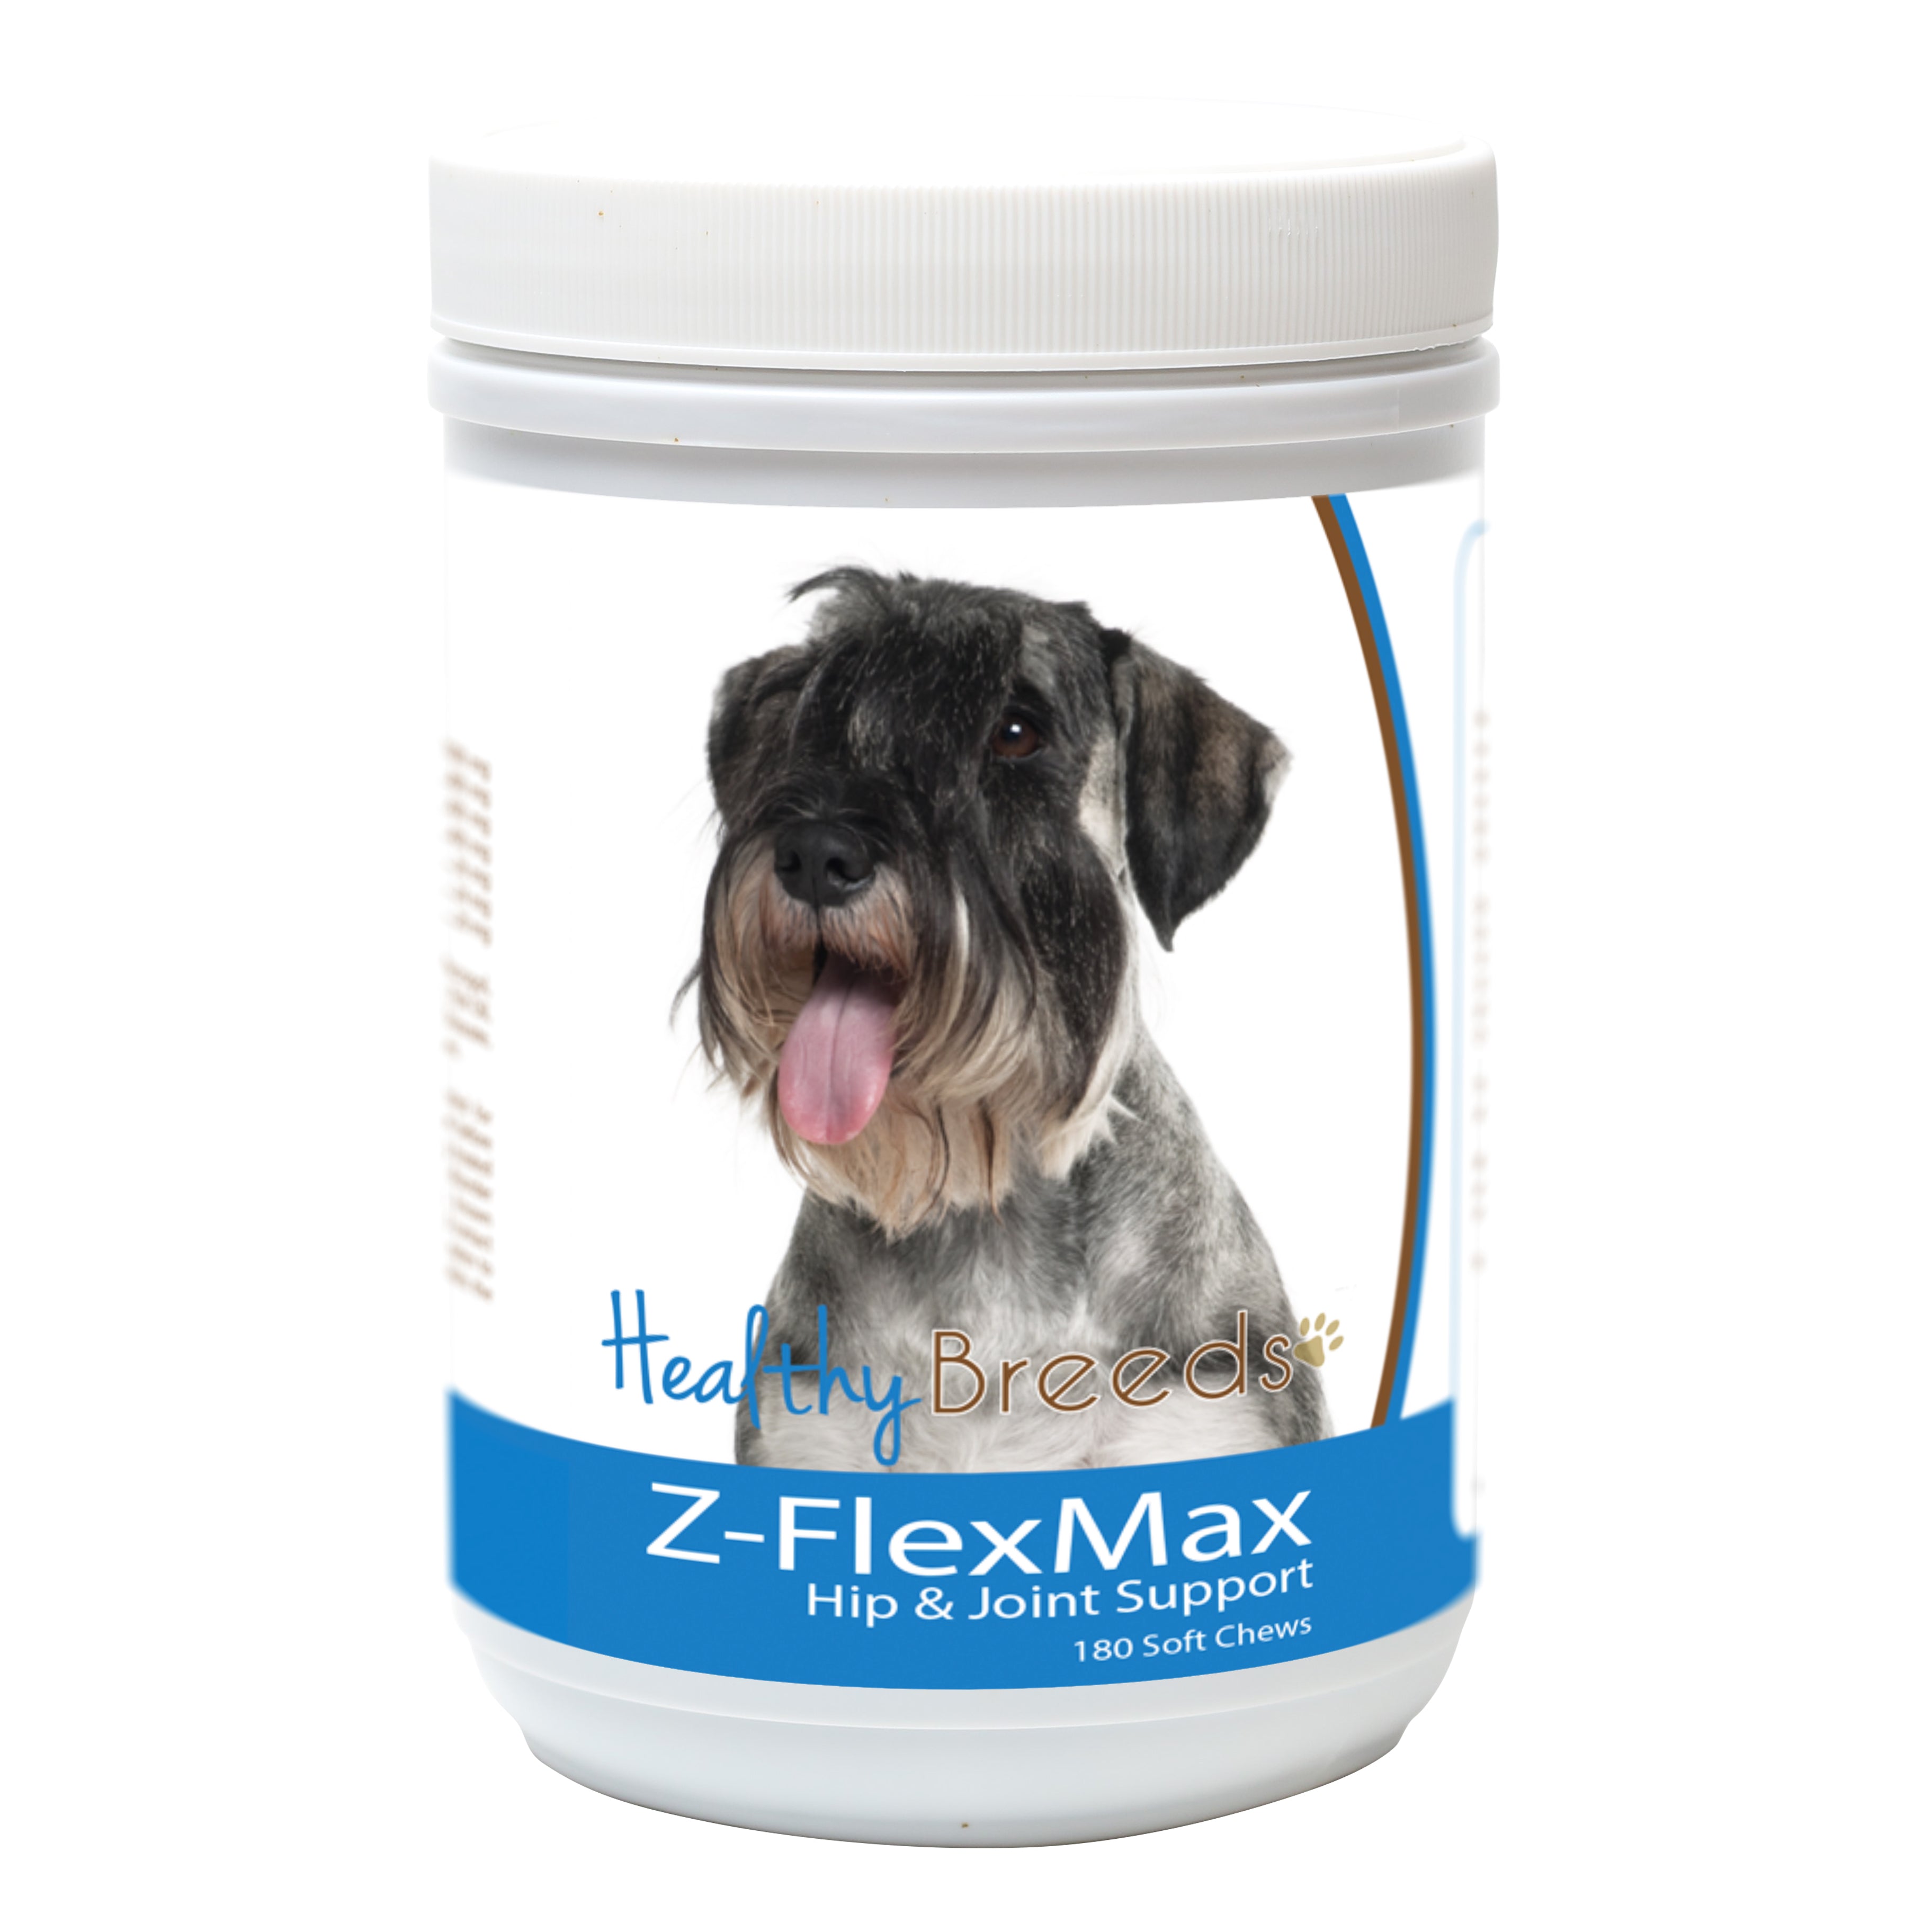 Standard Schnauzer Z-Flex Max Dog Hip and Joint Support 180 Count